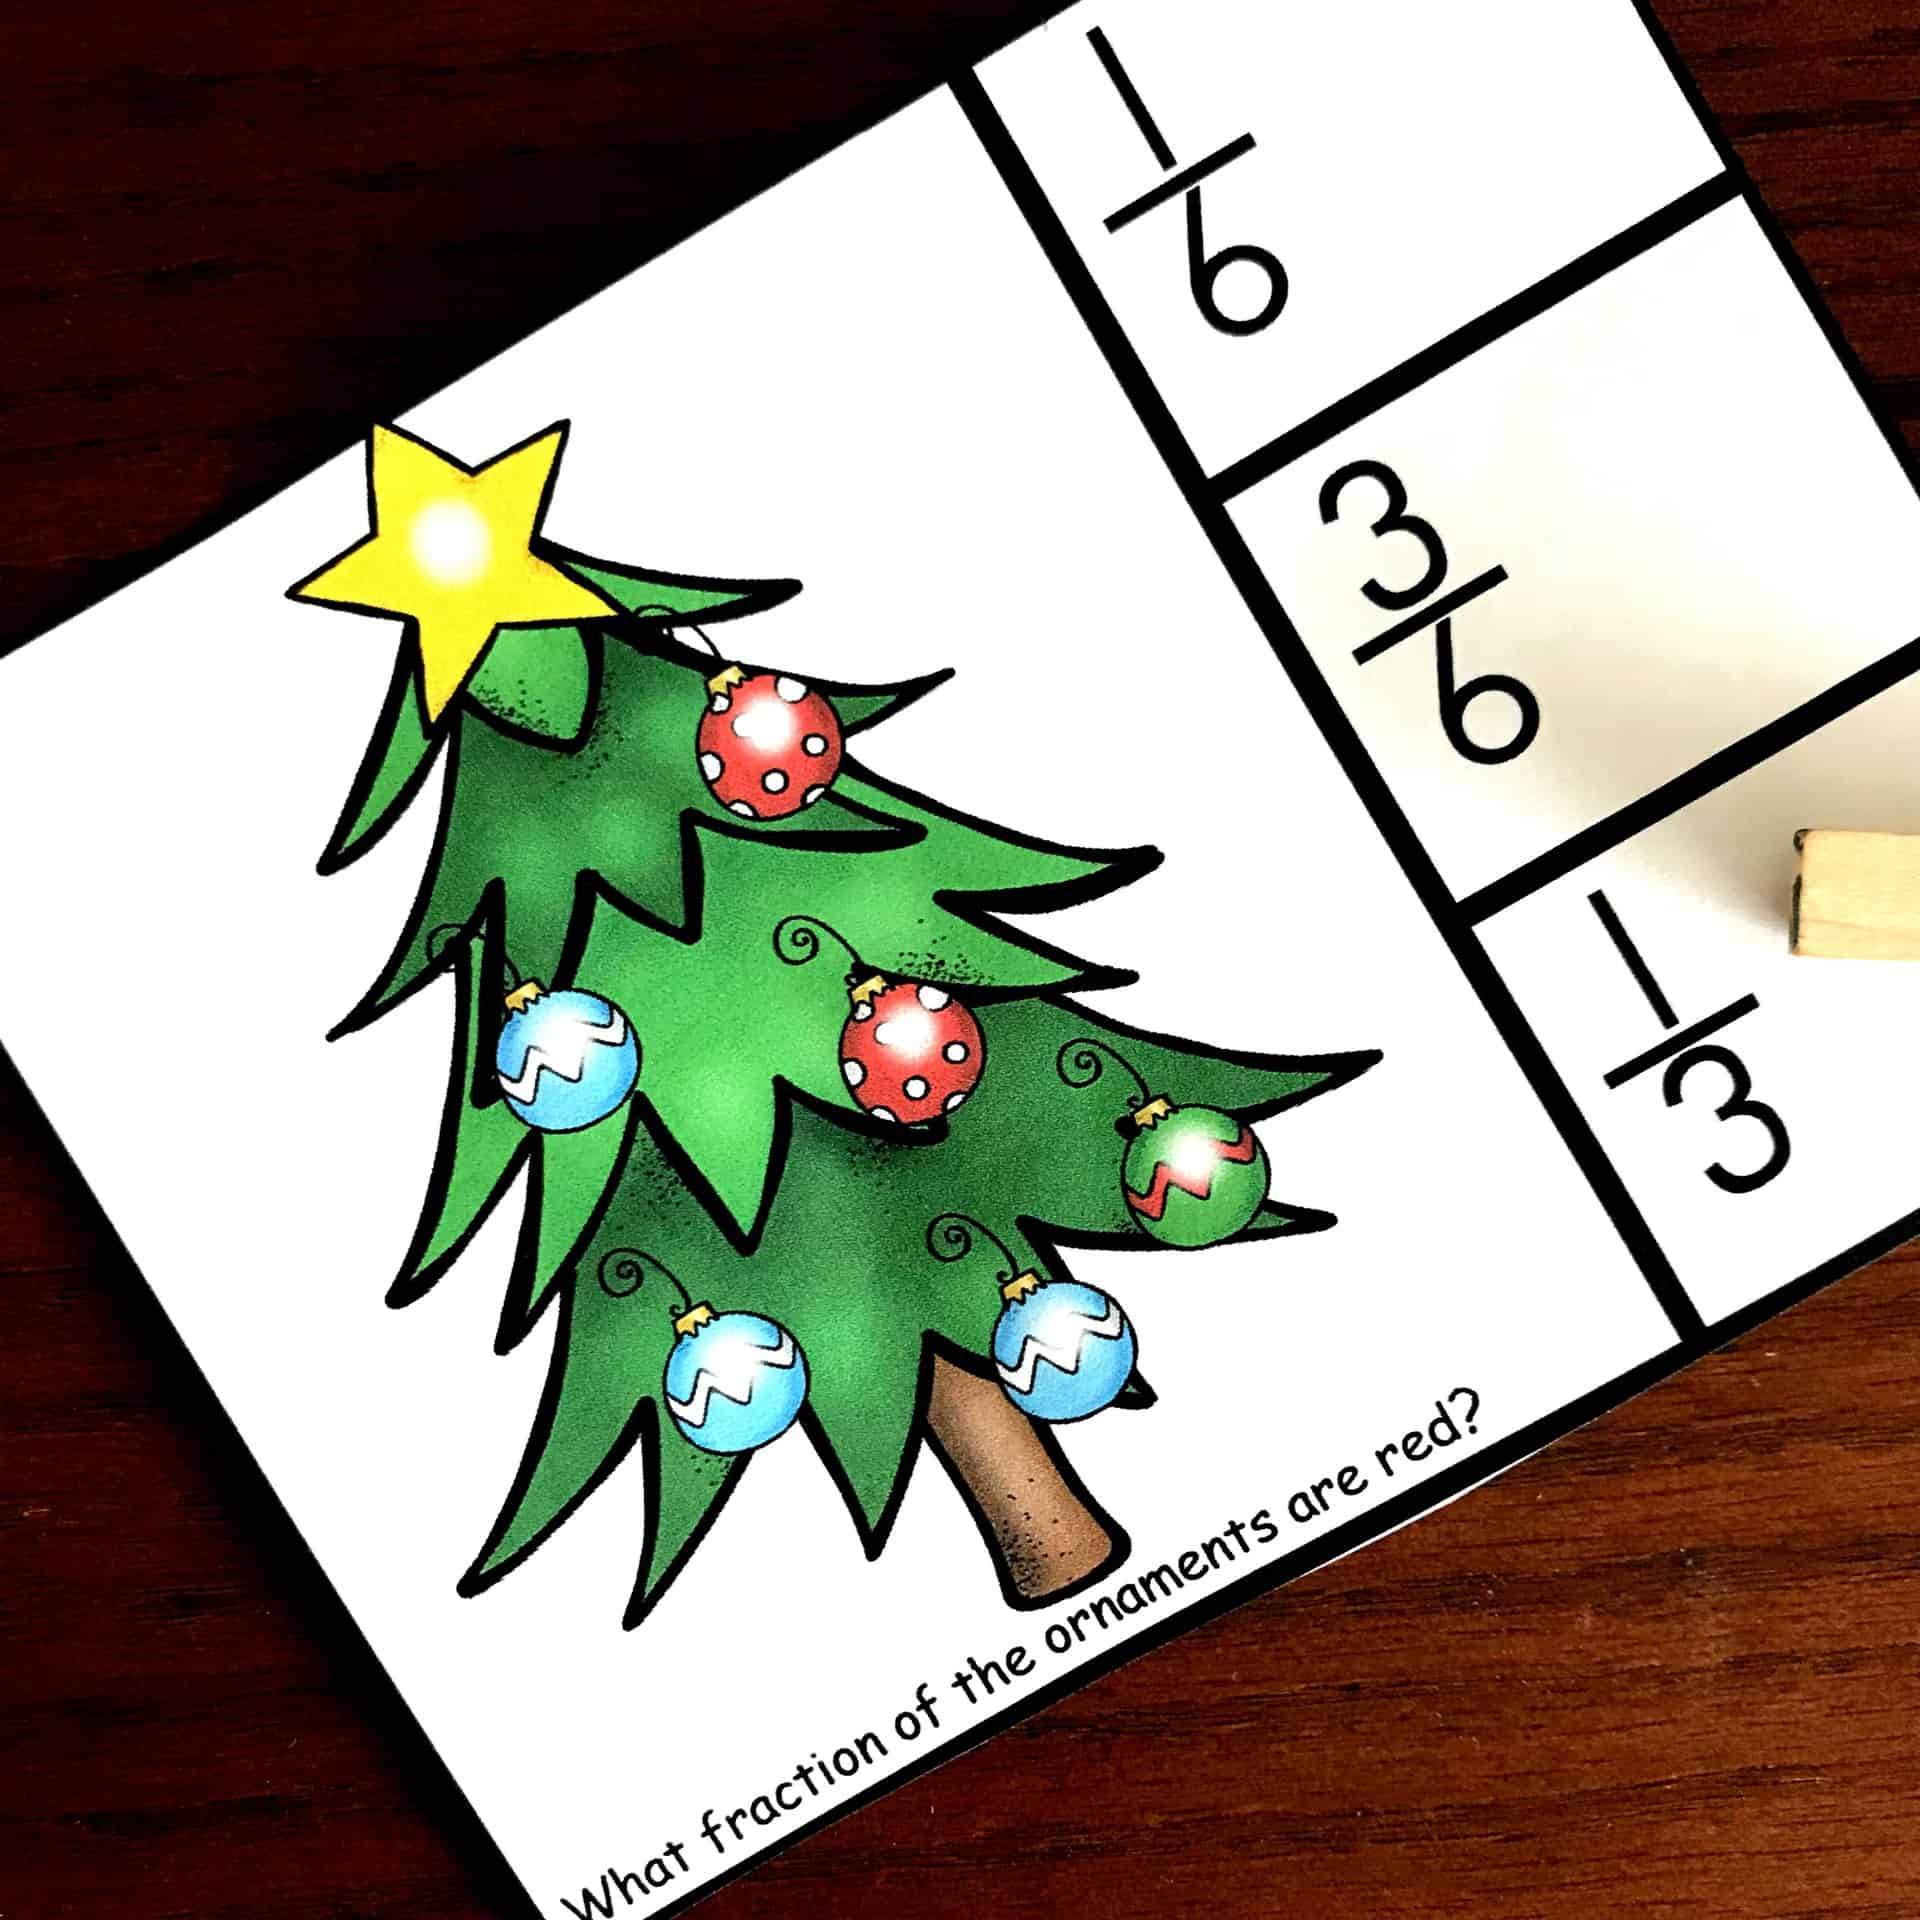 FREE Christmas Clip Cards to Practice Fractional Parts of A Set